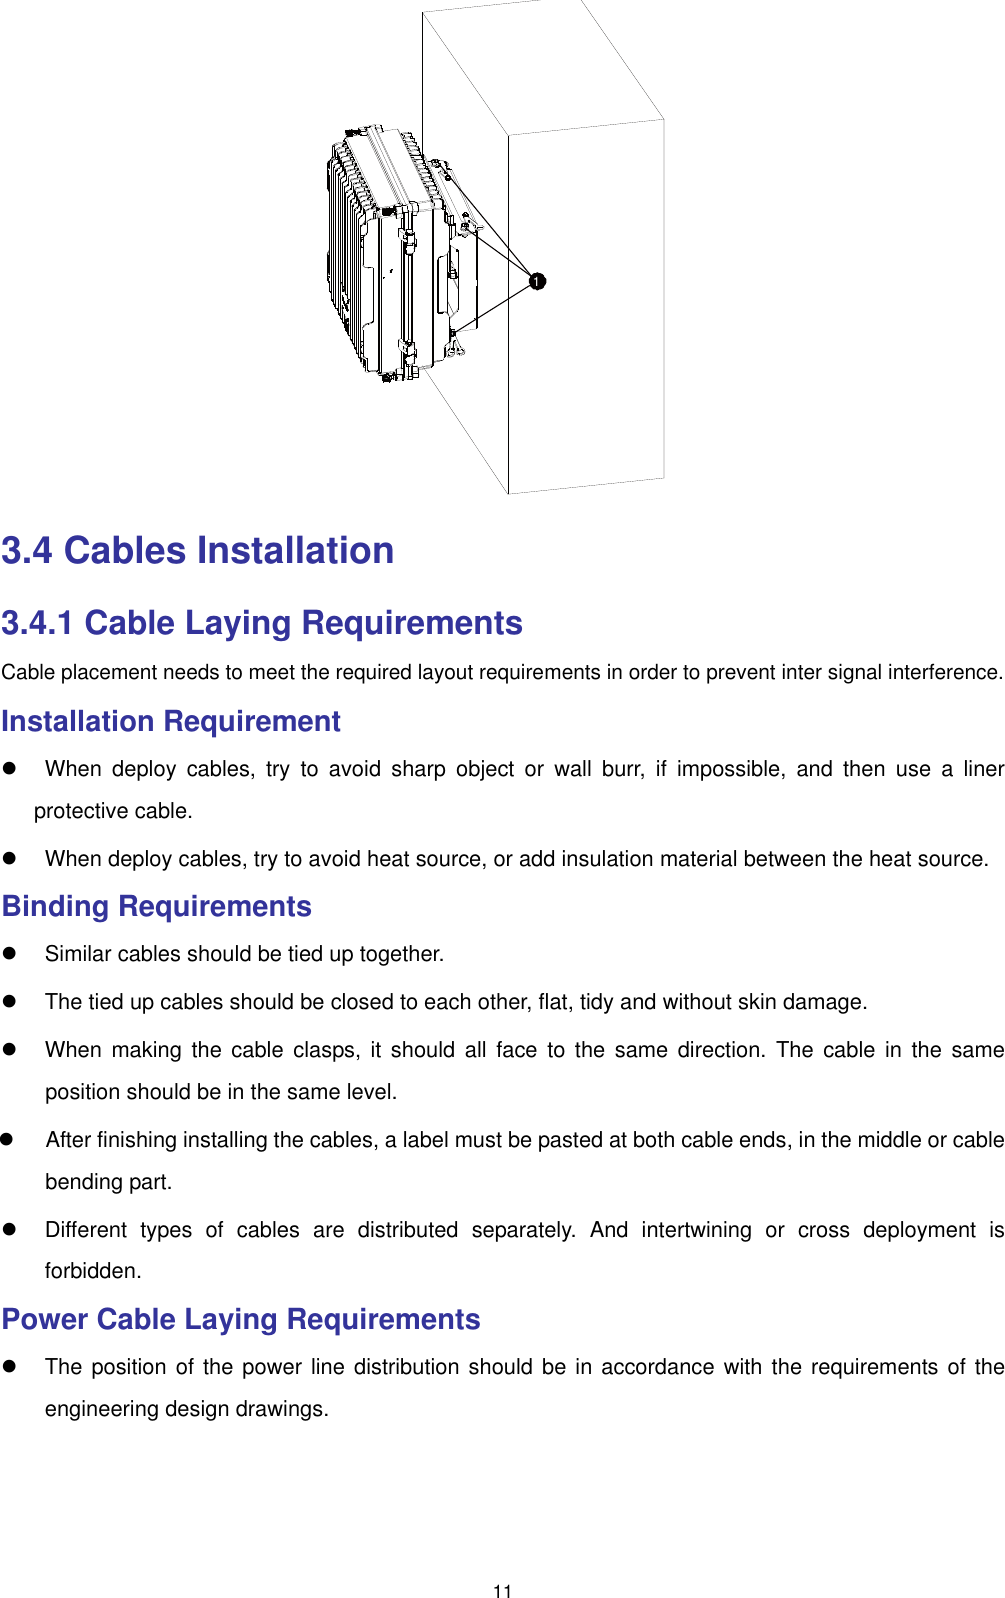  11 1 3.4 Cables Installation 3.4.1 Cable Laying Requirements Cable placement needs to meet the required layout requirements in order to prevent inter signal interference. Installation Requirement   When deploy cables, try to avoid sharp object or wall burr, if impossible, and then use a liner protective cable.   When deploy cables, try to avoid heat source, or add insulation material between the heat source.   Binding Requirements   Similar cables should be tied up together.   The tied up cables should be closed to each other, flat, tidy and without skin damage.   When making the cable clasps, it should all face to the same direction. The cable in the same position should be in the same level.   After finishing installing the cables, a label must be pasted at both cable ends, in the middle or cable bending part.   Different types of cables are distributed separately. And intertwining or cross deployment is forbidden. Power Cable Laying Requirements   The position of the power line distribution should be in accordance with the requirements of the engineering design drawings. 